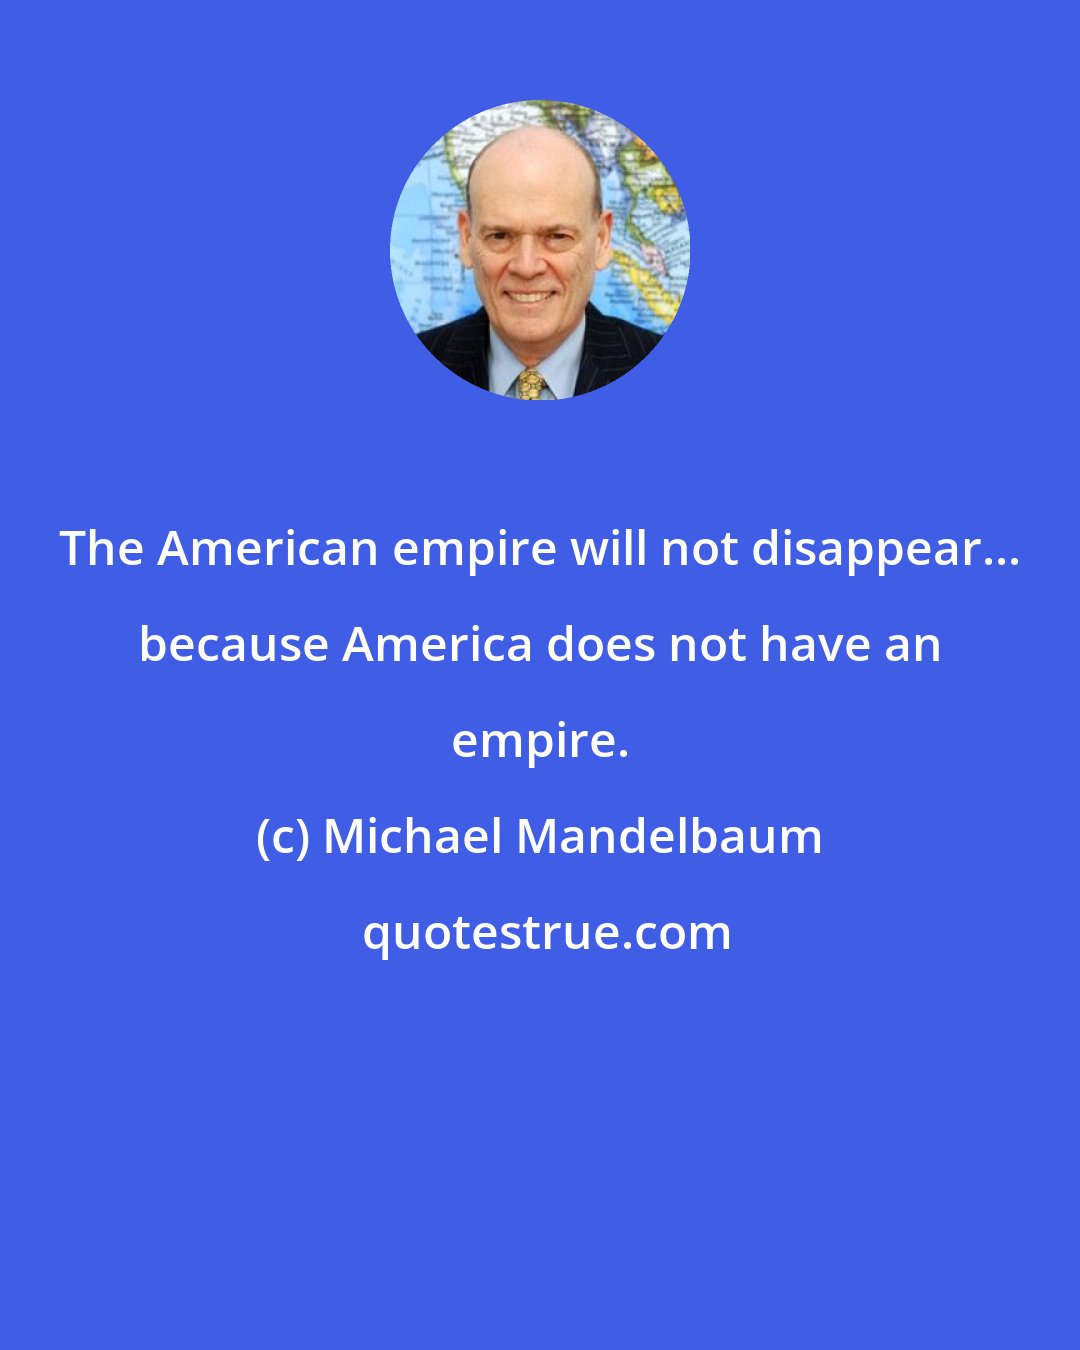 Michael Mandelbaum: The American empire will not disappear... because America does not have an empire.